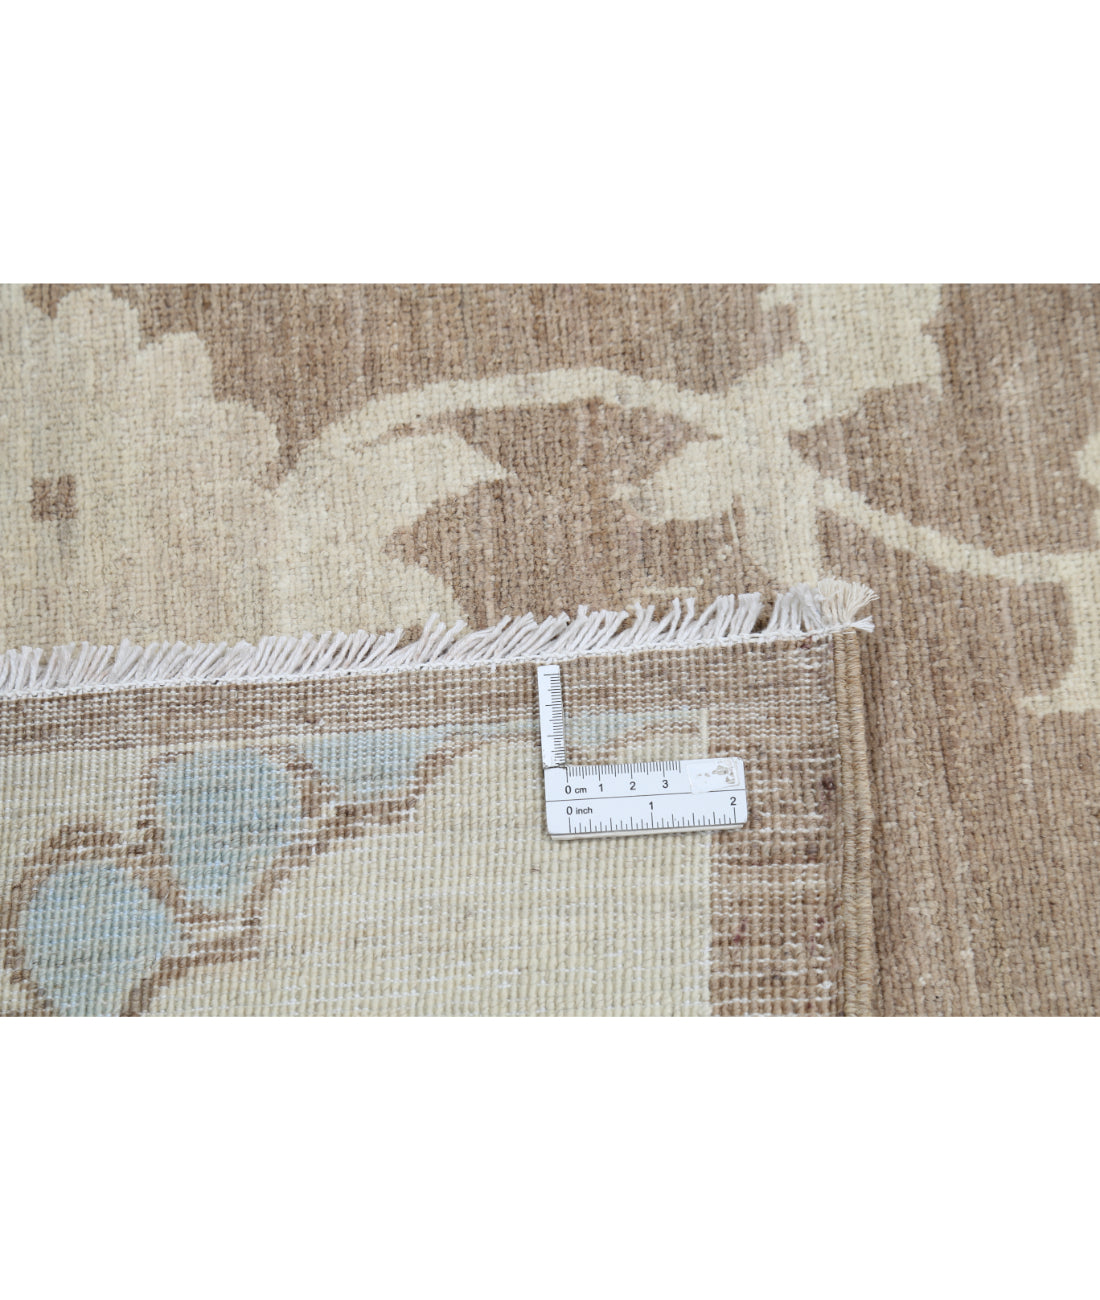 Hand Knotted Artemix Wool Rug - 8'10'' x 11'9'' 8'10'' x 11'9'' (265 X 353) / Taupe / Ivory